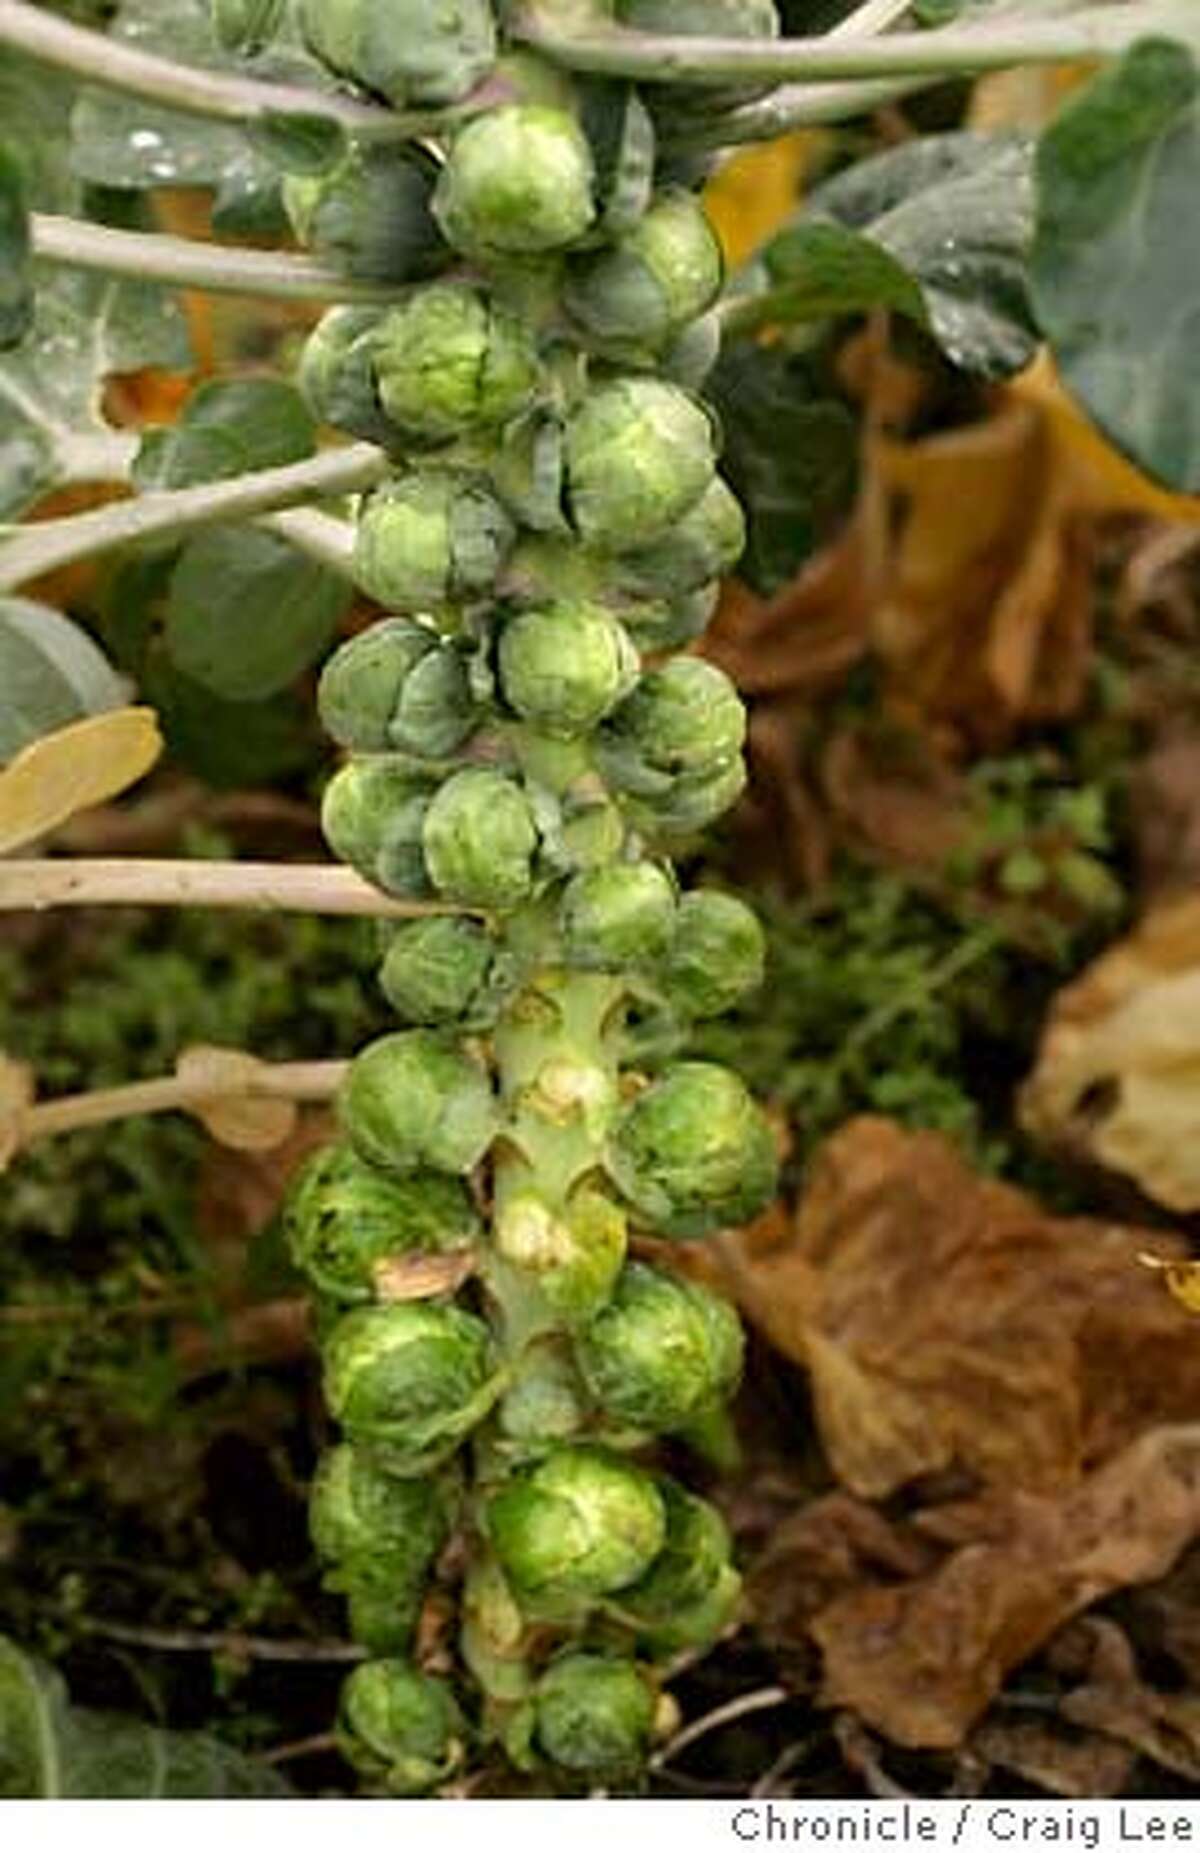 SEASONAL03_045_cl.JPG Seasonal Cook column on Brussels sprouts. Don Murch is one of the very few organic Brussels sprouts growers in the state. Close-up photo of Brussels sprouts still on the stalk. Event on 10/19/04 in Bolinas. Craig Lee / The Chronicle Ran on: 11-05-2004 Ran on: 10-25-2006 Ran on: 01-11-2007 Brussels sprouts on the stalk. MANDATORY CREDIT FOR PHOTOG AND SF CHRONICLE/NO SALES-MAGS OUT